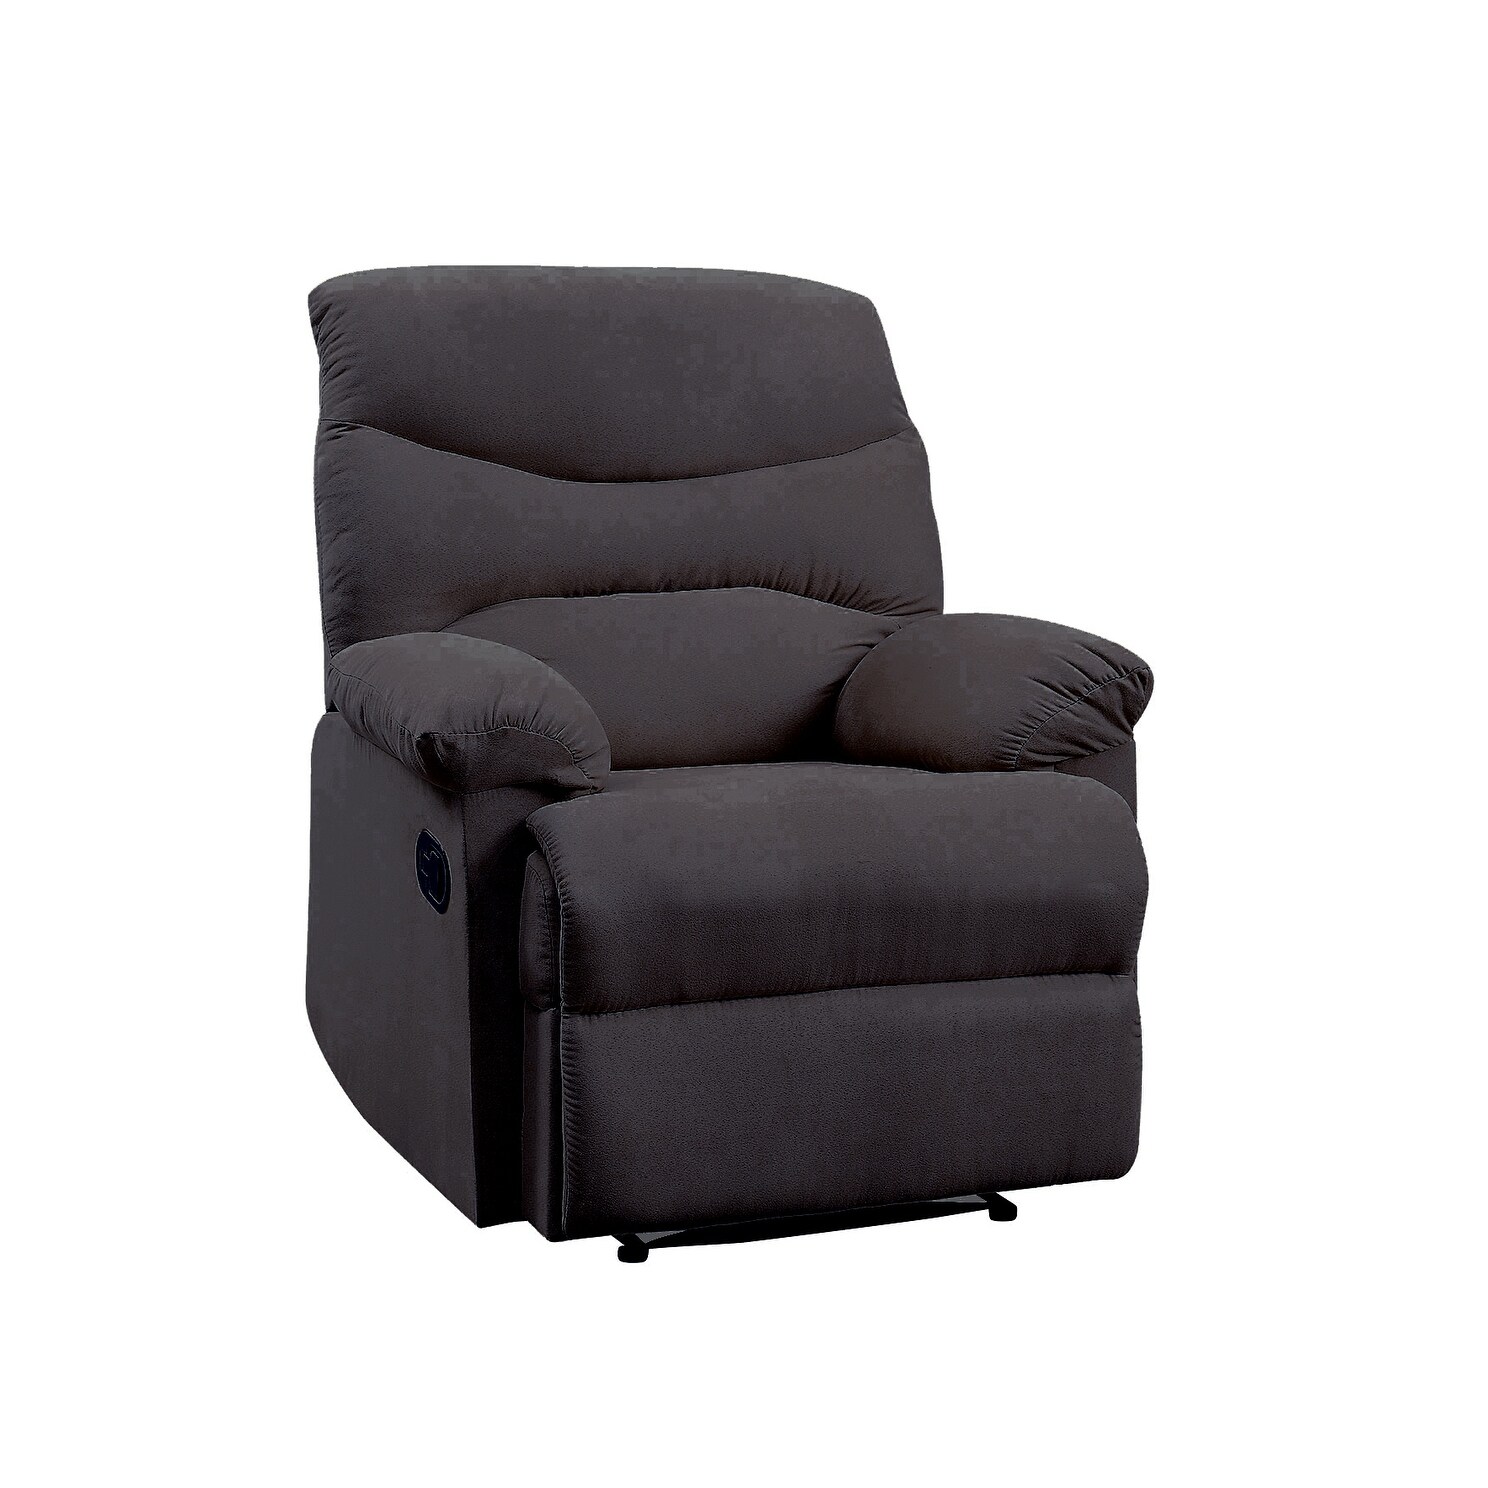 Motion Recliner with Pillow Top Armrest and Tight Seat & Back Cushion, Manual Reclining Mechanism - Black